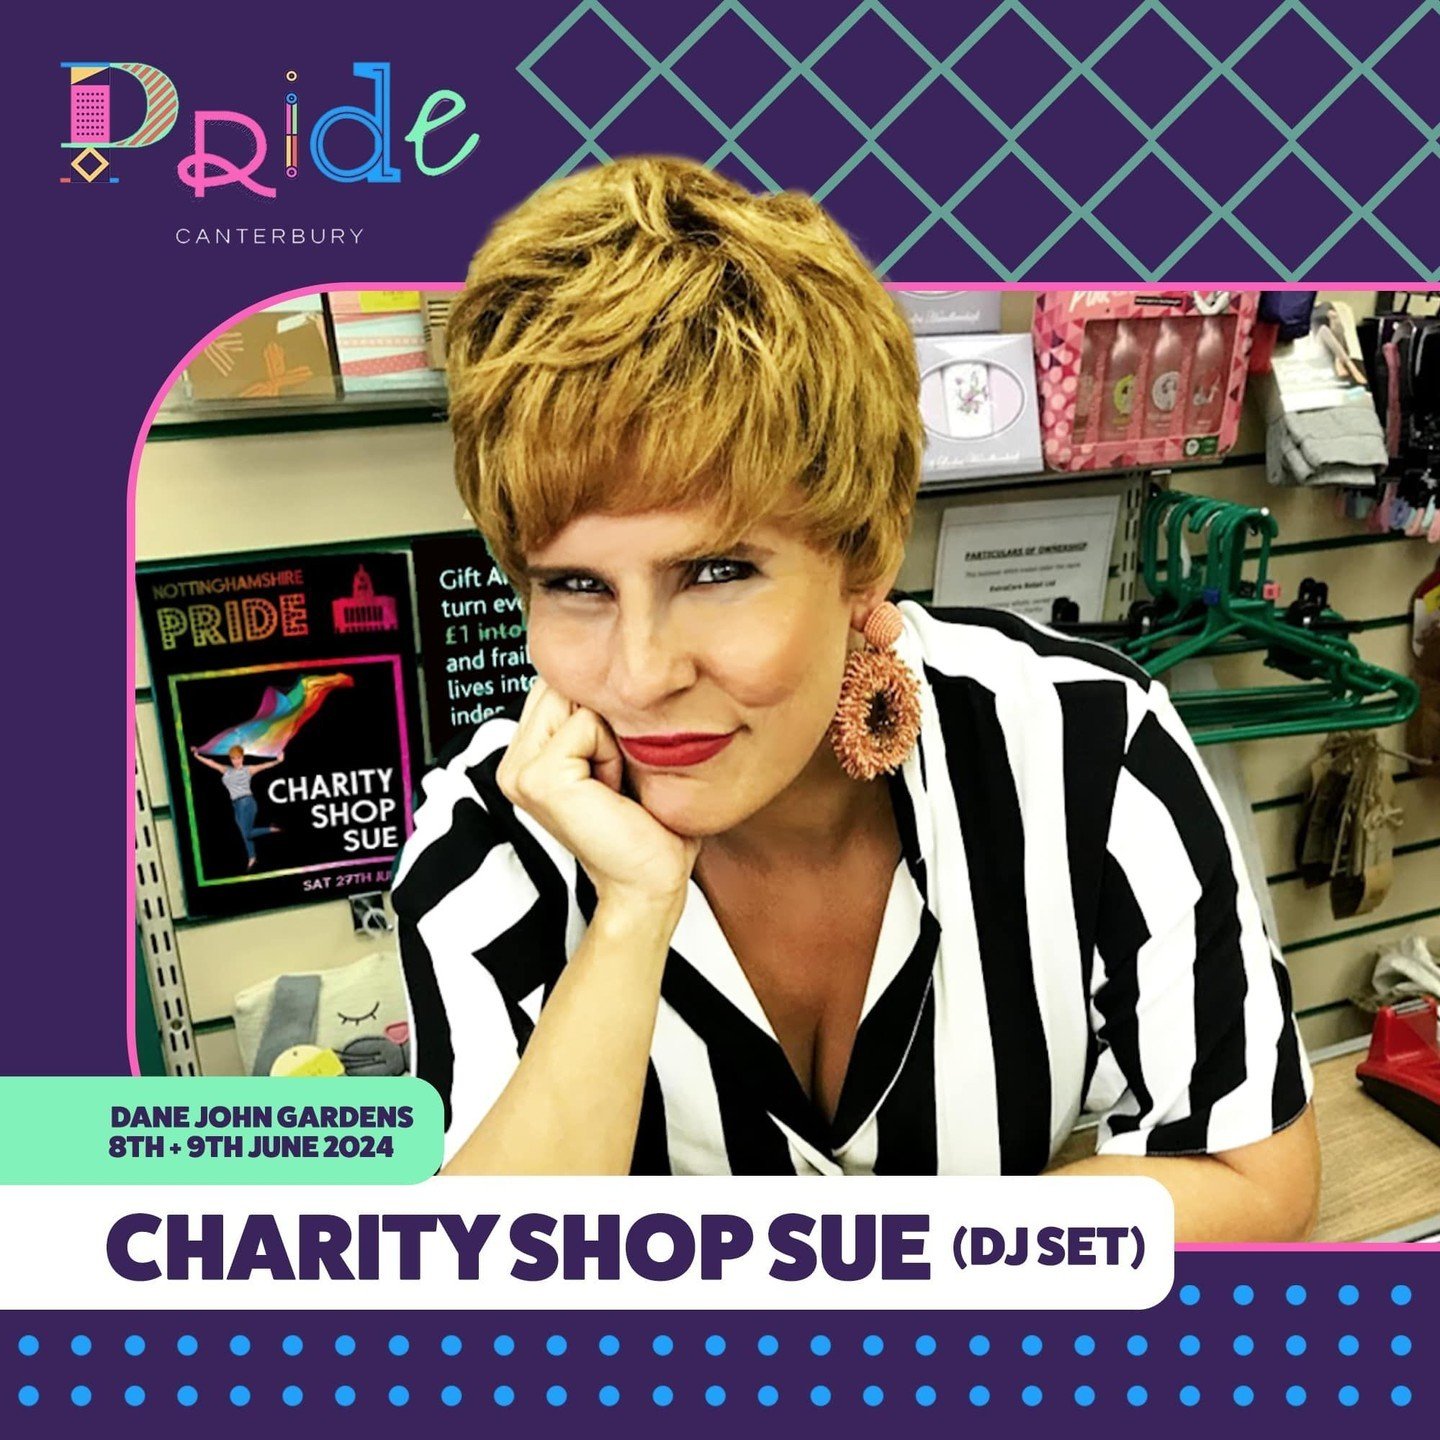 📣 Pride Canterbury 2024 line-up Announcement 
@CharityShopSue
YouTube and LGBTQ+ star Has closed the shop &amp; will be doing a DJ set 

More coming soon 👀